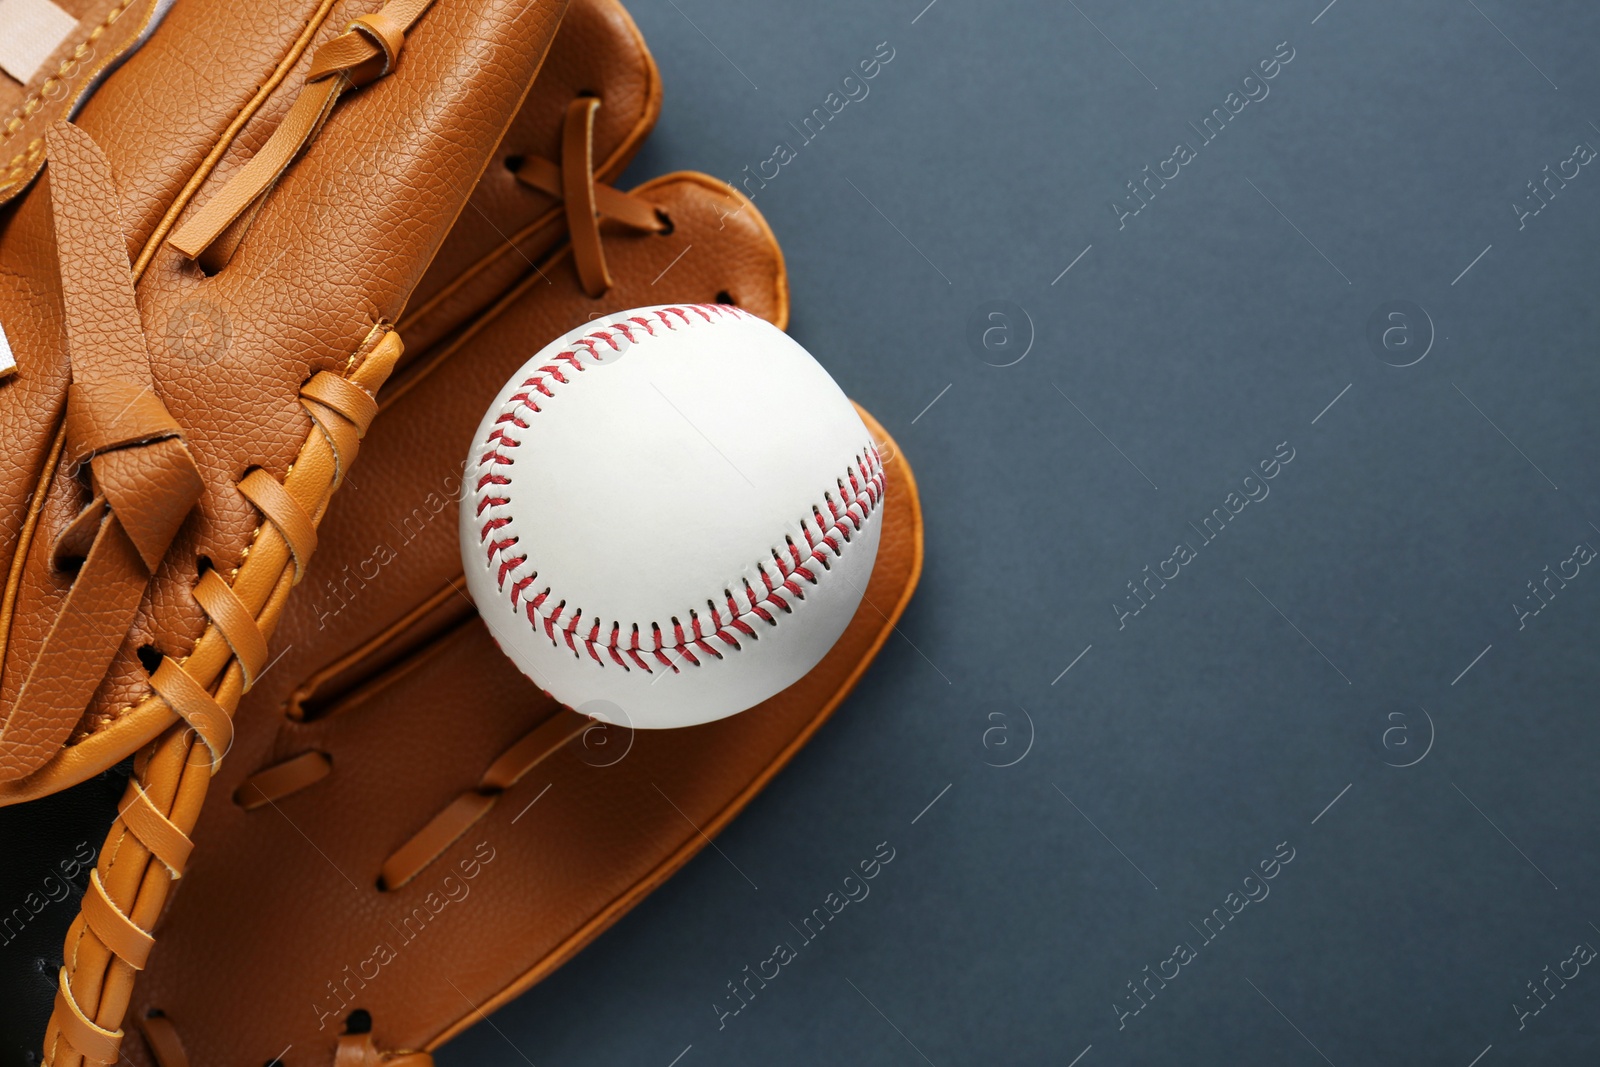 Photo of Catcher's mitt and baseball ball on dark background, top view with space for text. Sports game